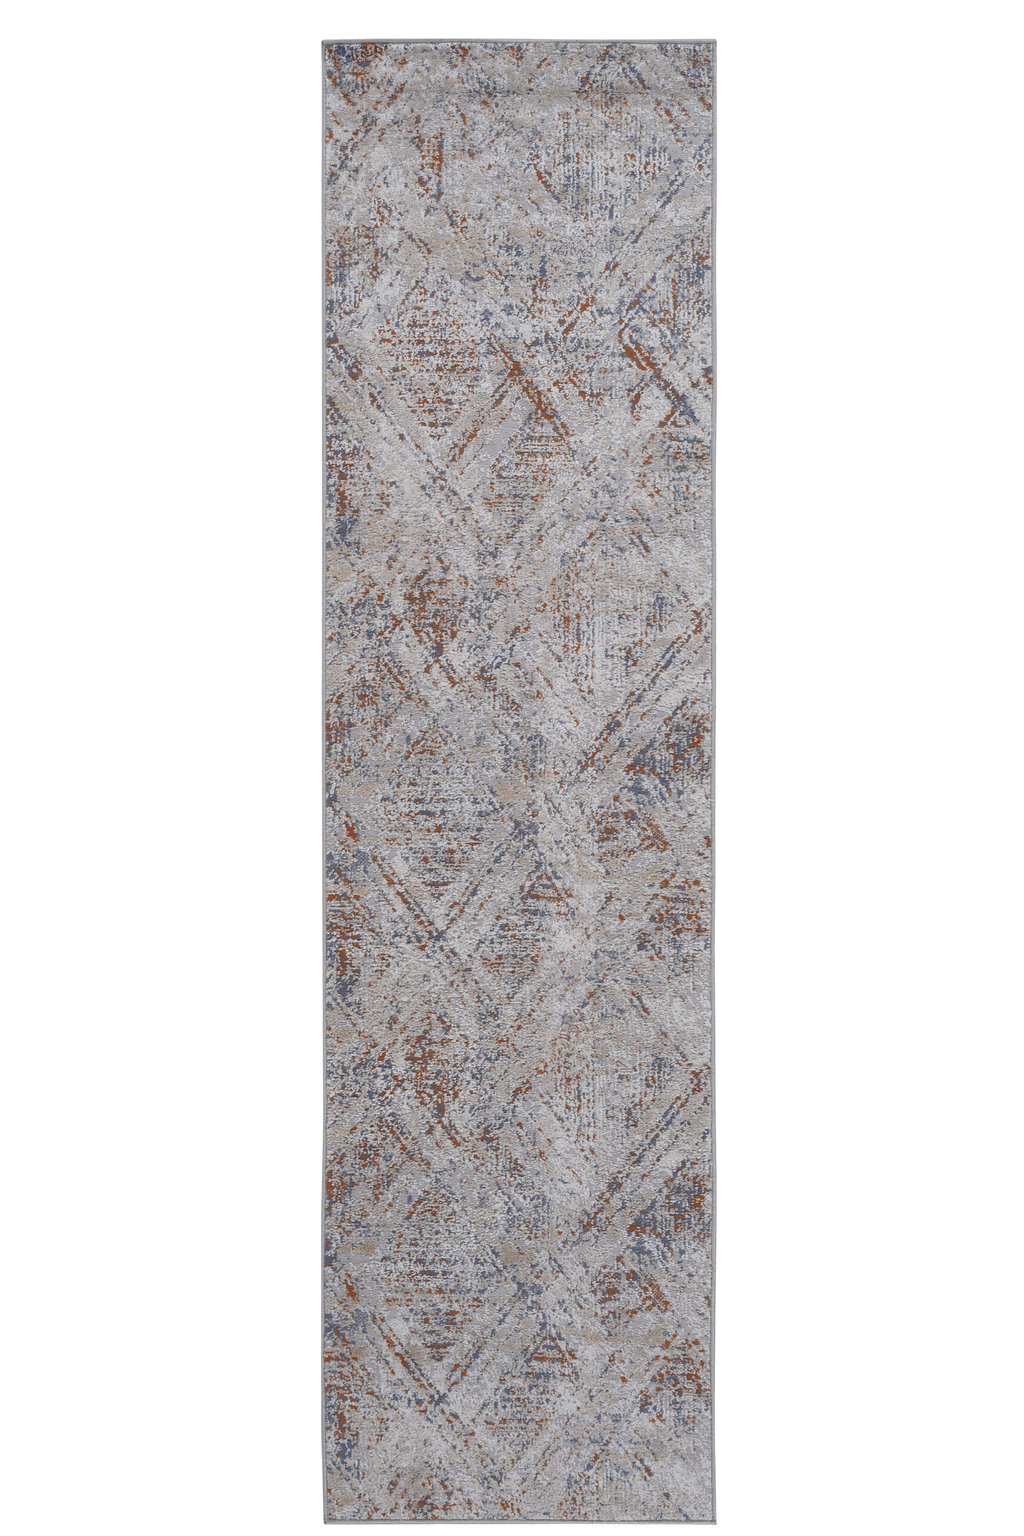 Leoglint NAAR PAYAS Collection 2X8 Beige /Geometric Non-Shedding Living Room Bedroom Dining Home Office Stylish and Stain Resistant Area Rug